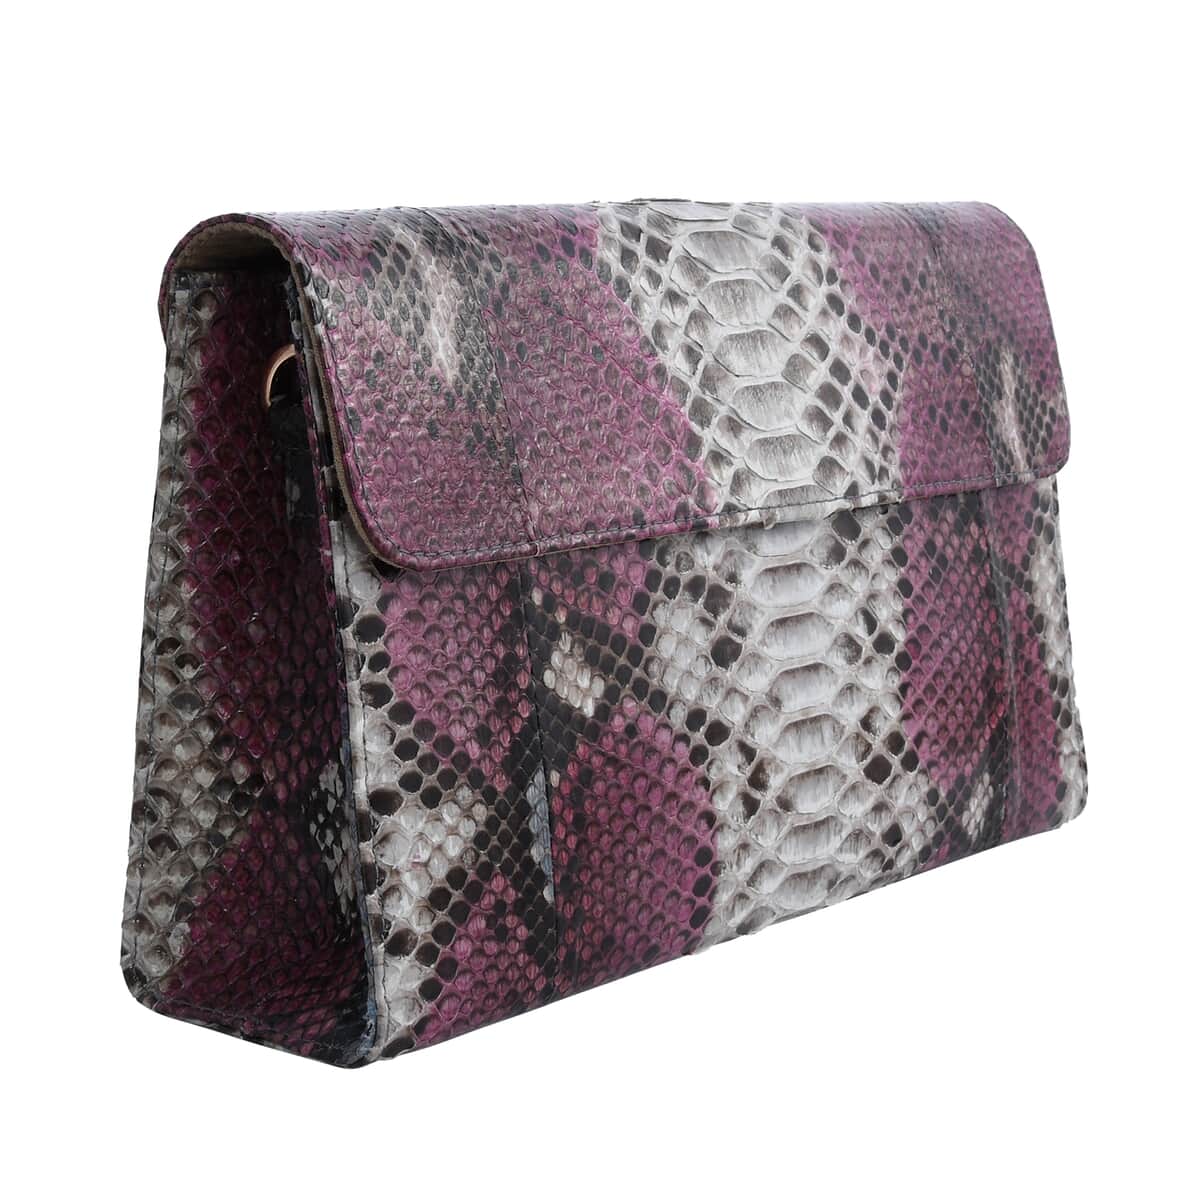 The Pelle Collection Multi Color Python Leather Evening Clutch Bag with Detachable Strap, Clutches for Women, Leather Handbag, Clutch Purse image number 3